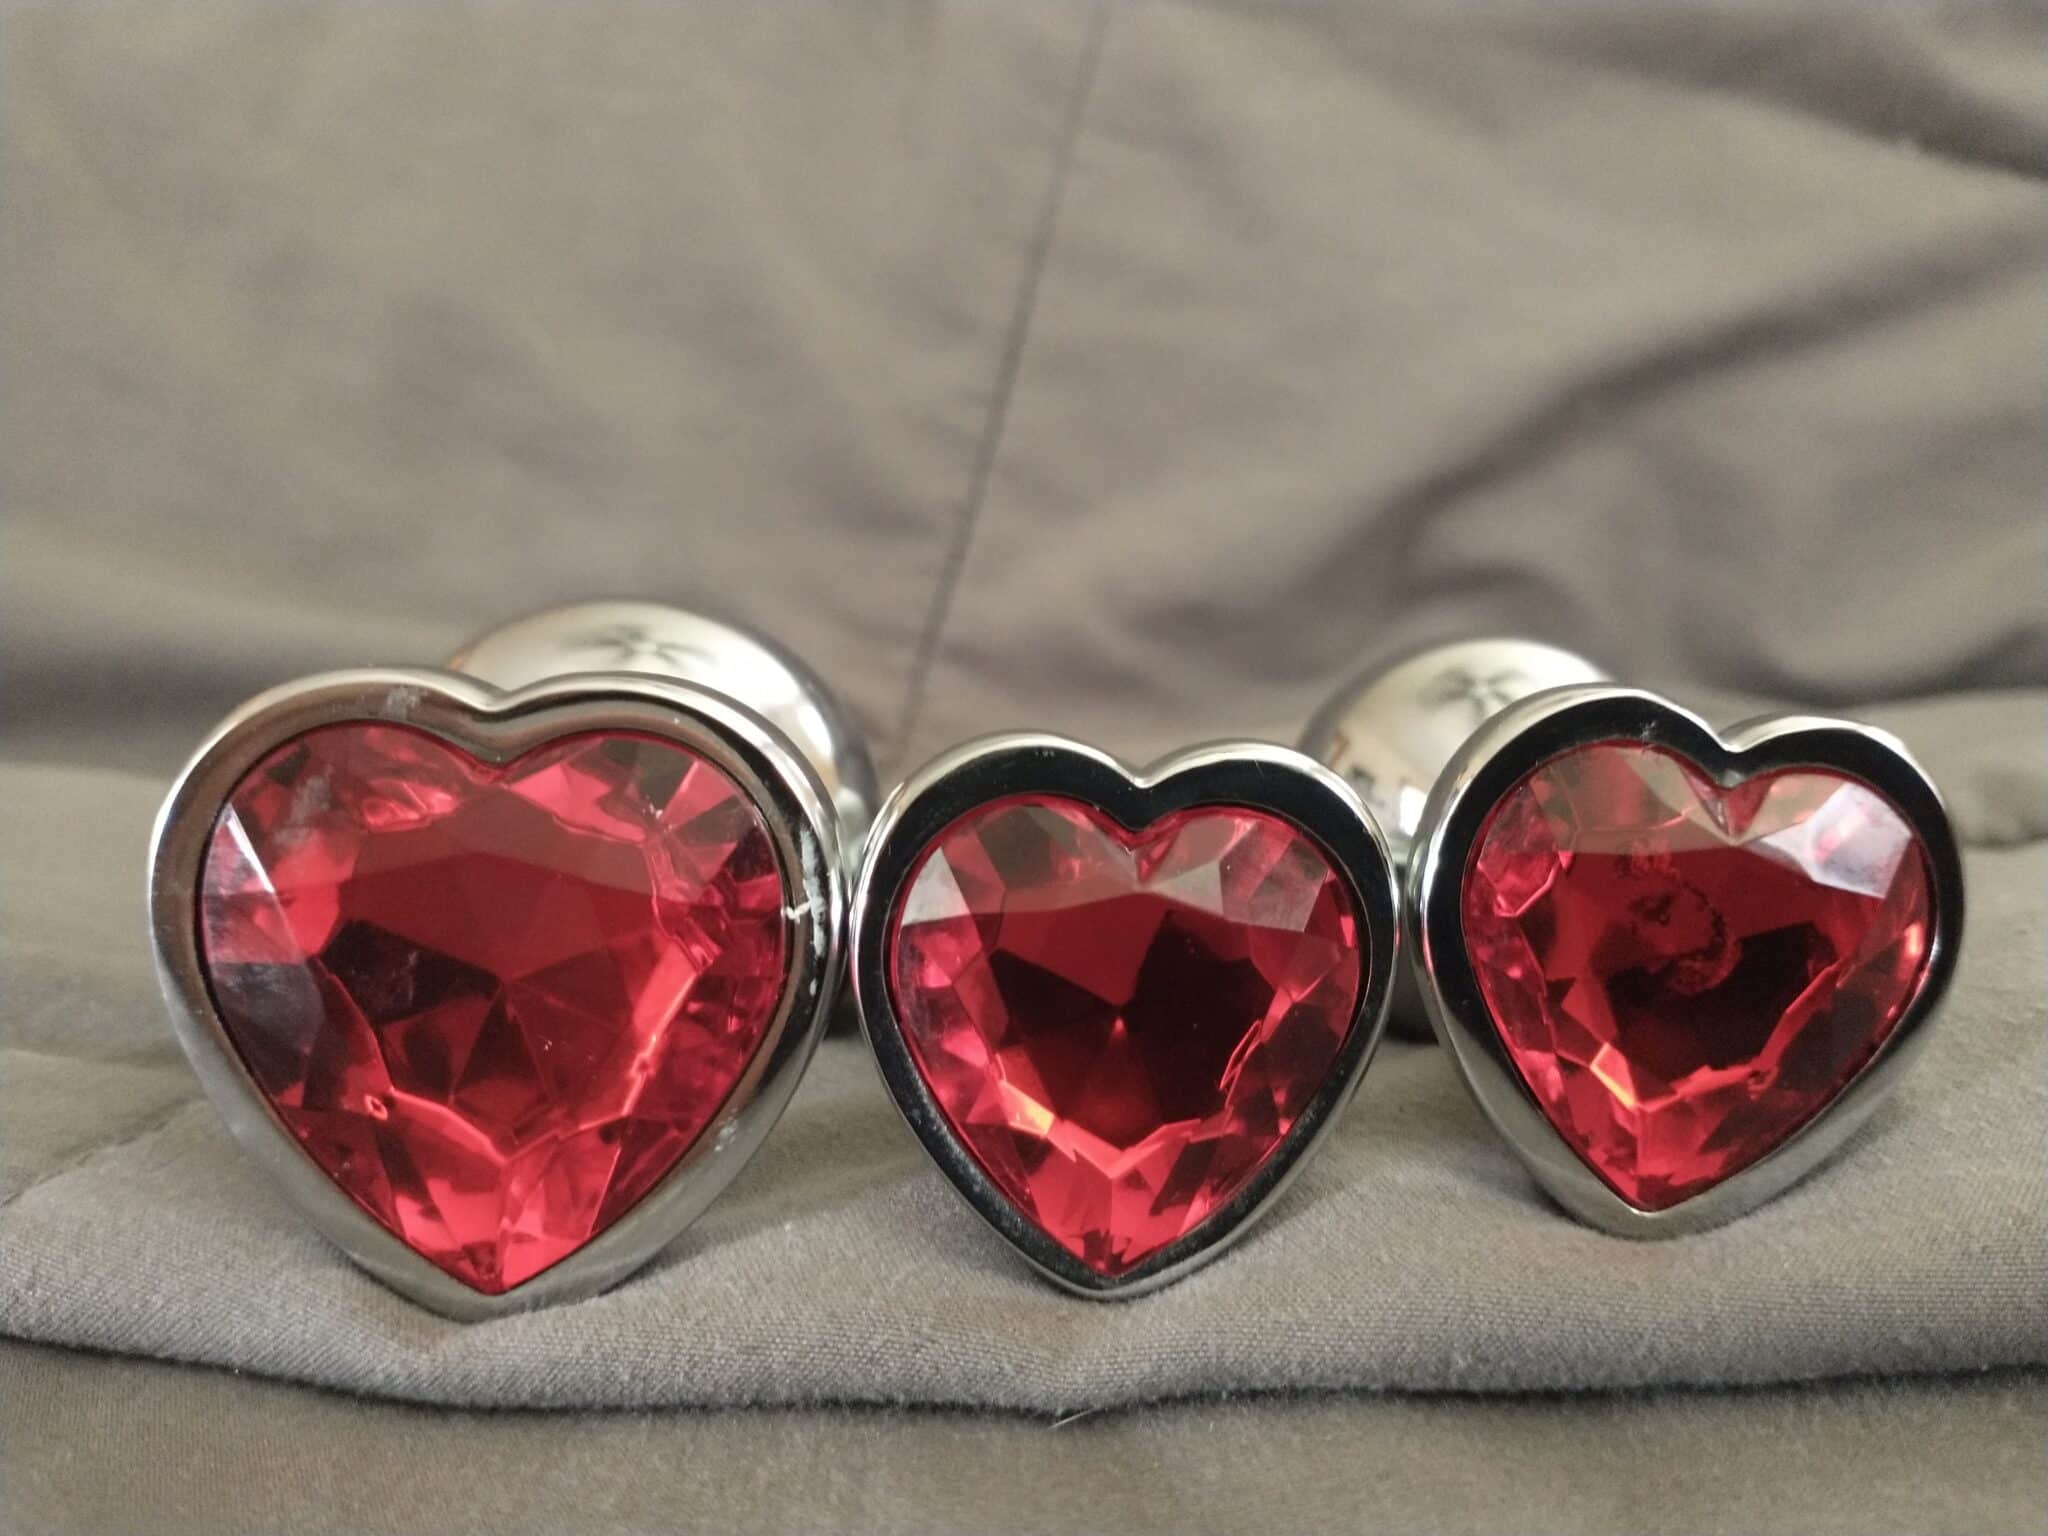 Red Heart Gem Anal Plug Set The Unboxing Experience: A Review